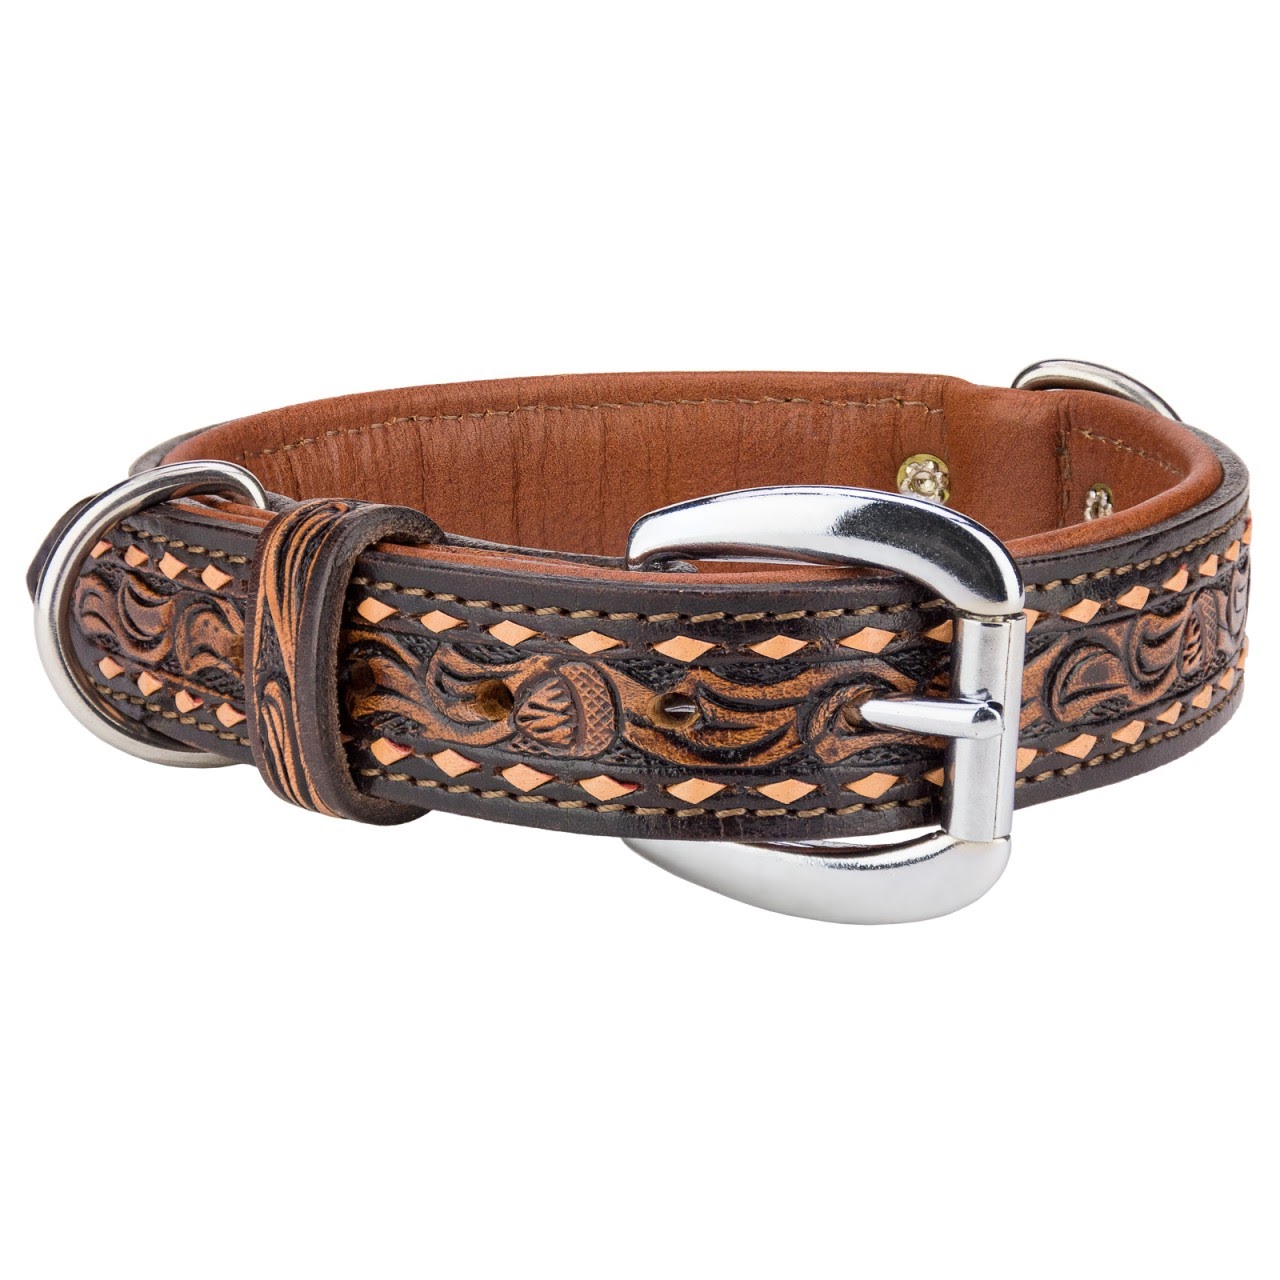 Purchasing a New Dog Collar - Leather